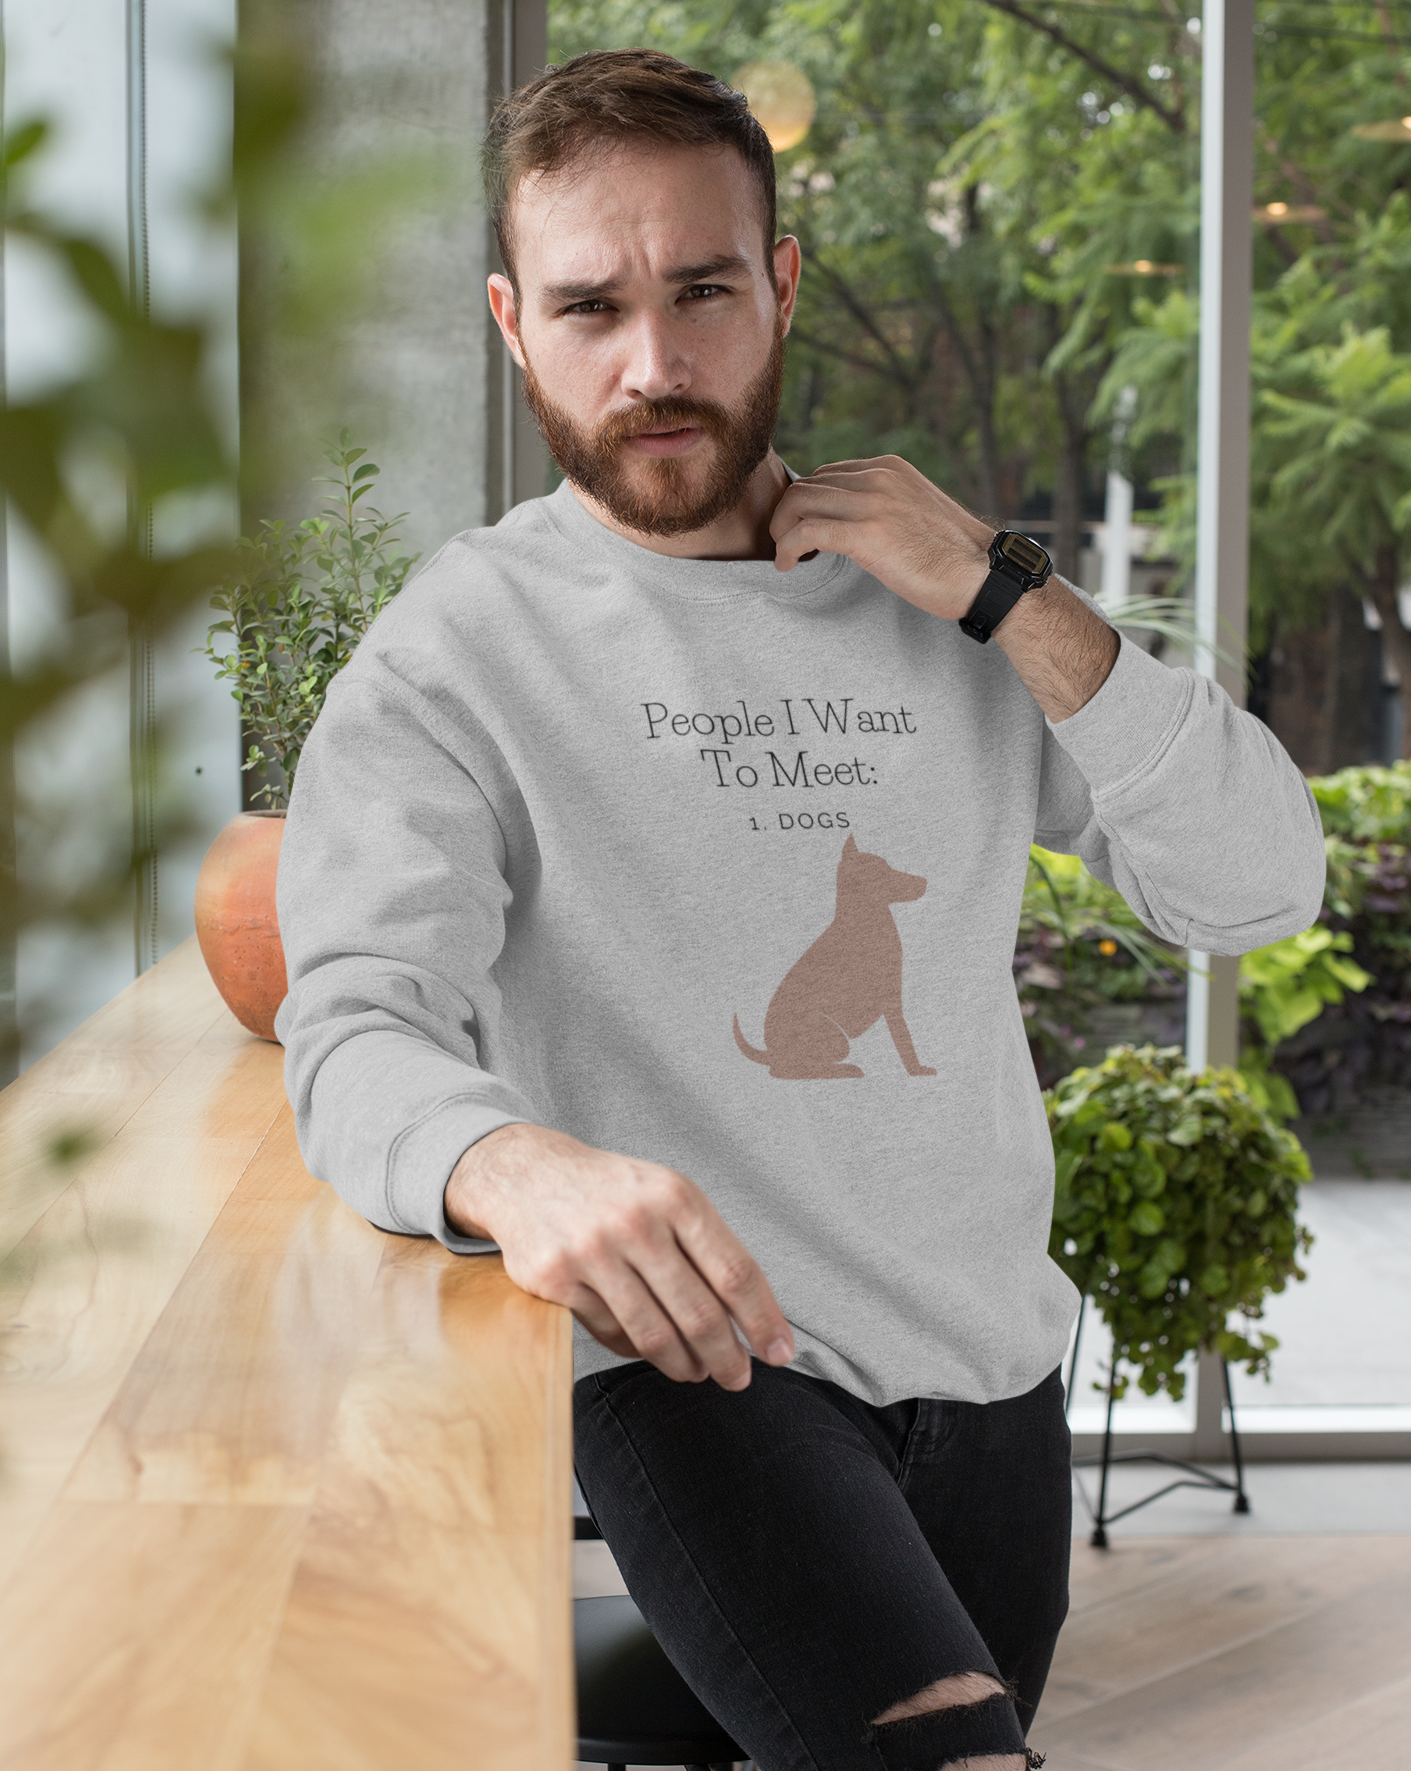 Dogs are way better than people. This funny dog crewneck sweatshirt is perfect for every dog lover. Designed with a high quality cotton that is extremely soft and cozy. Add this piece to your closet and watch your list of dog friends skyrocket, we promise.